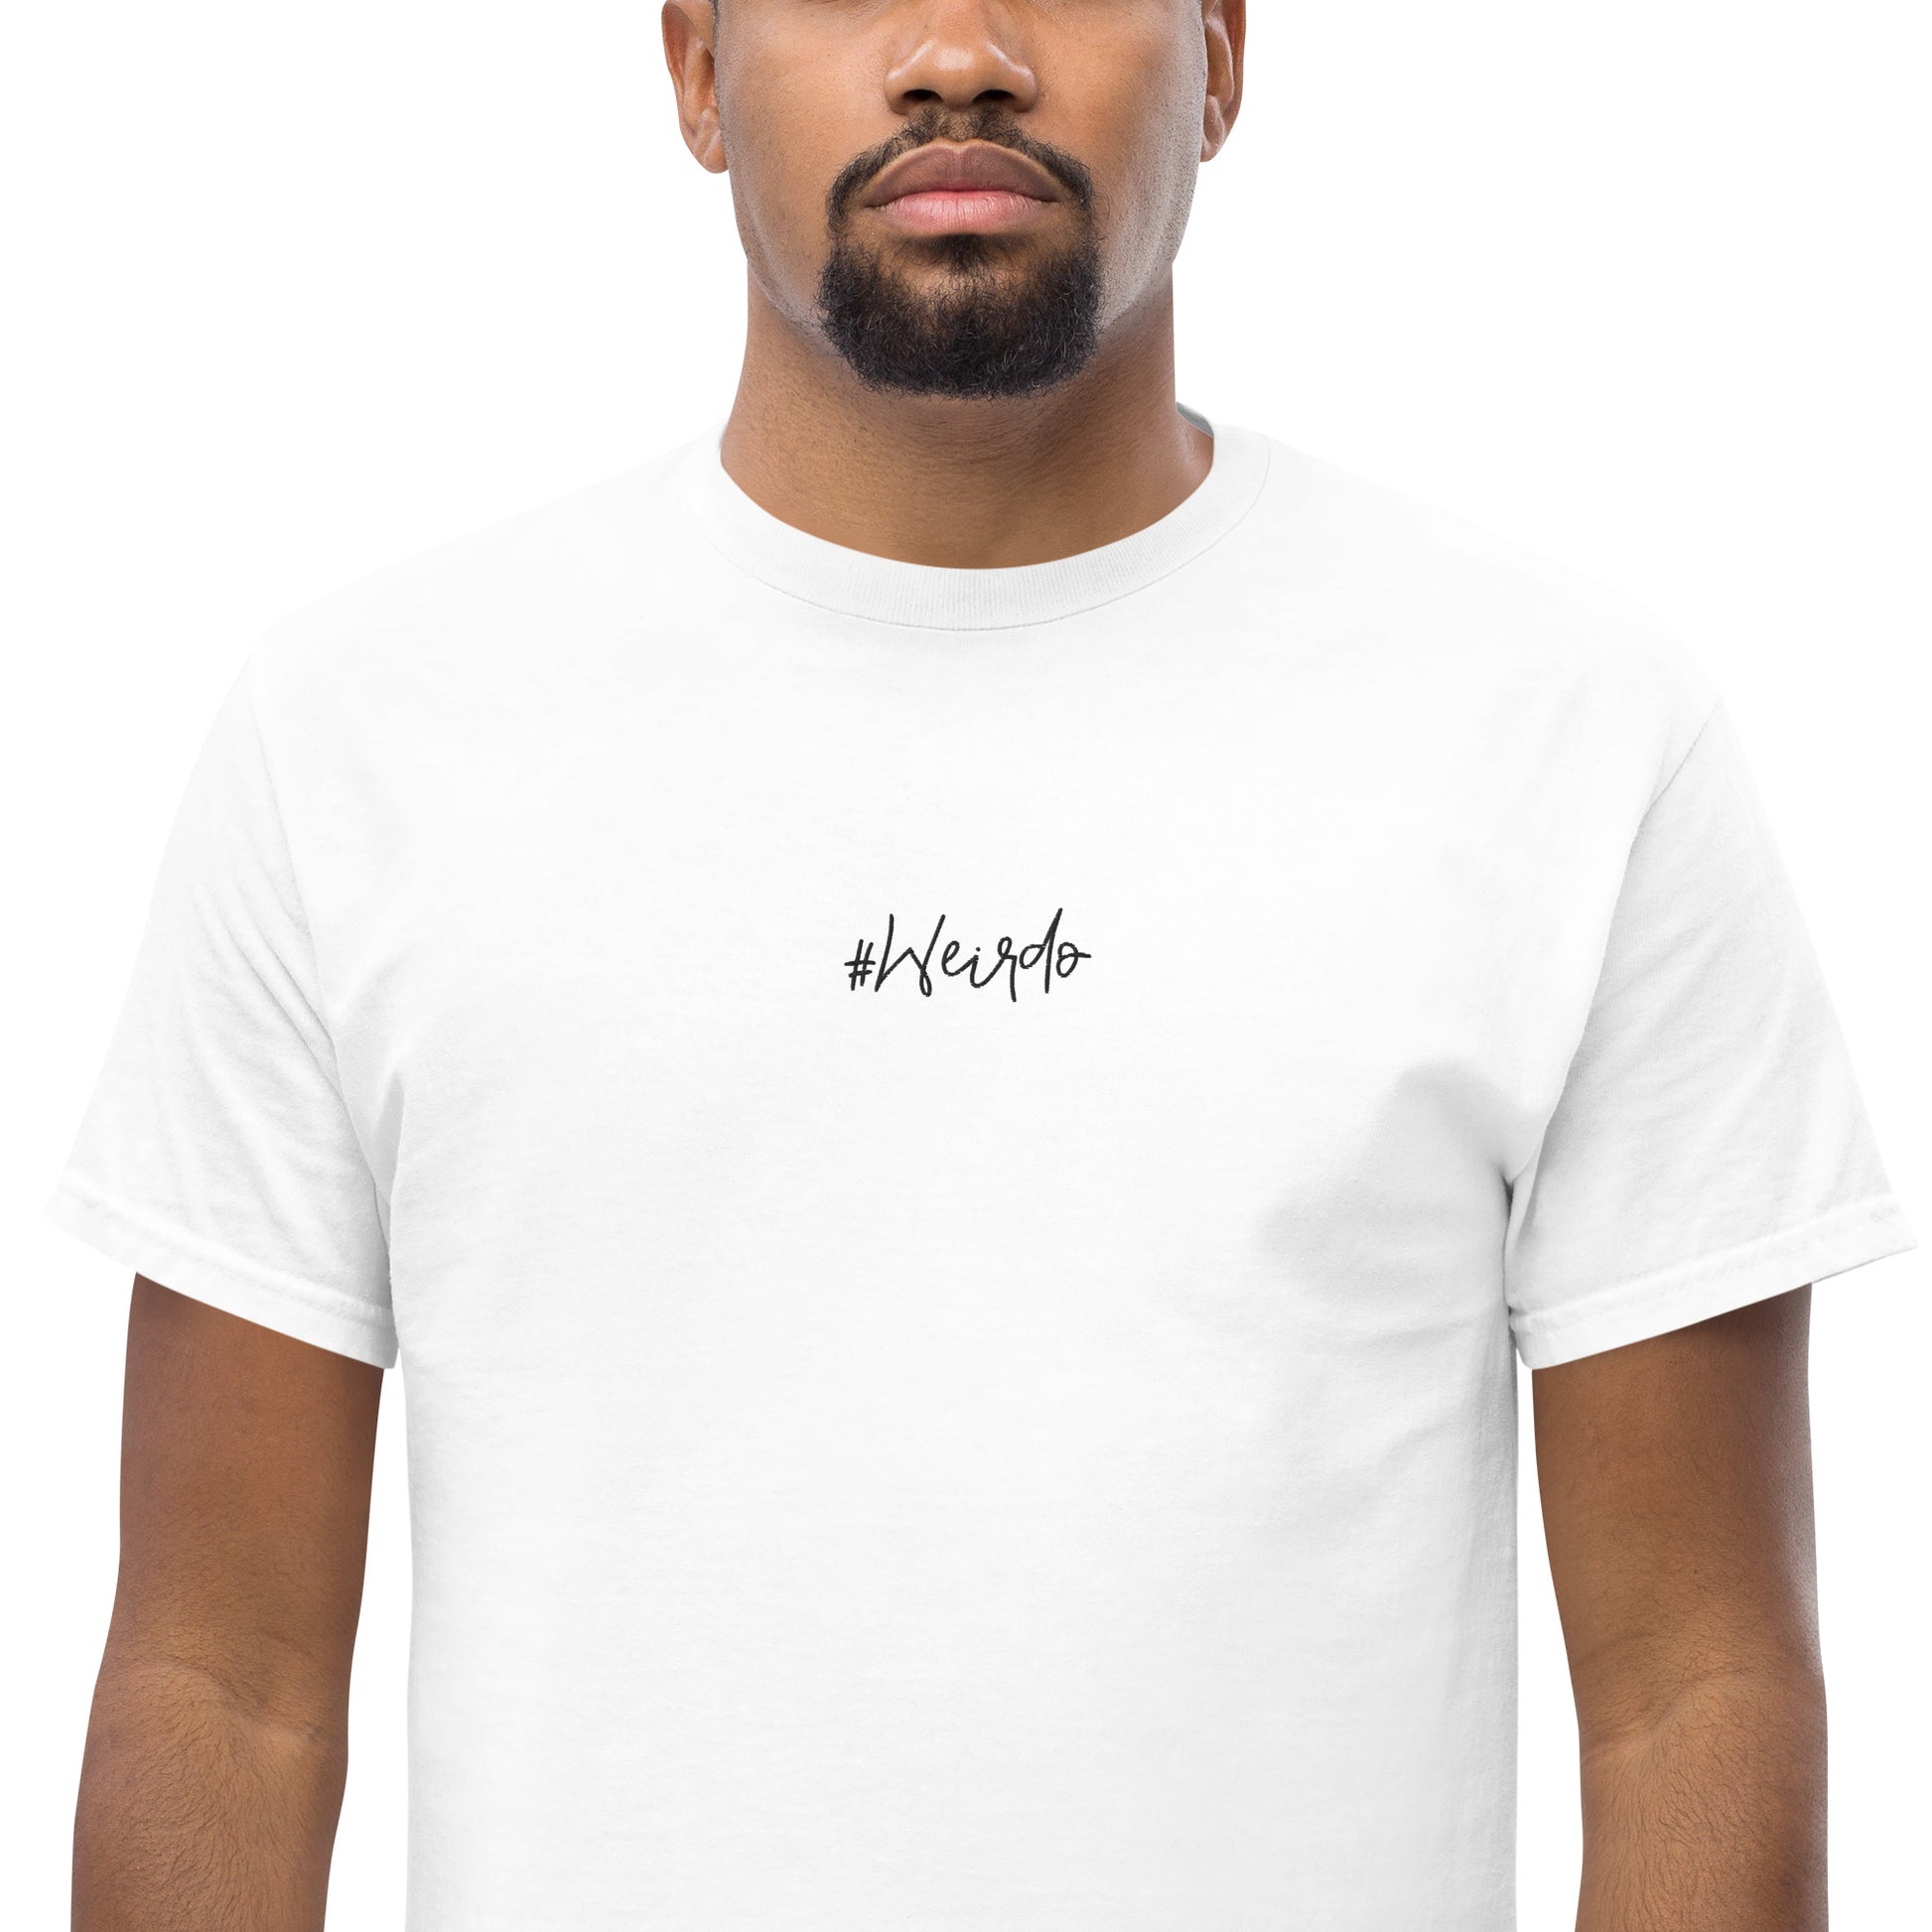 #WEIRDO | Mens classic tee from our basic line. Check out more basic shit in our online giftstore for weirdos!